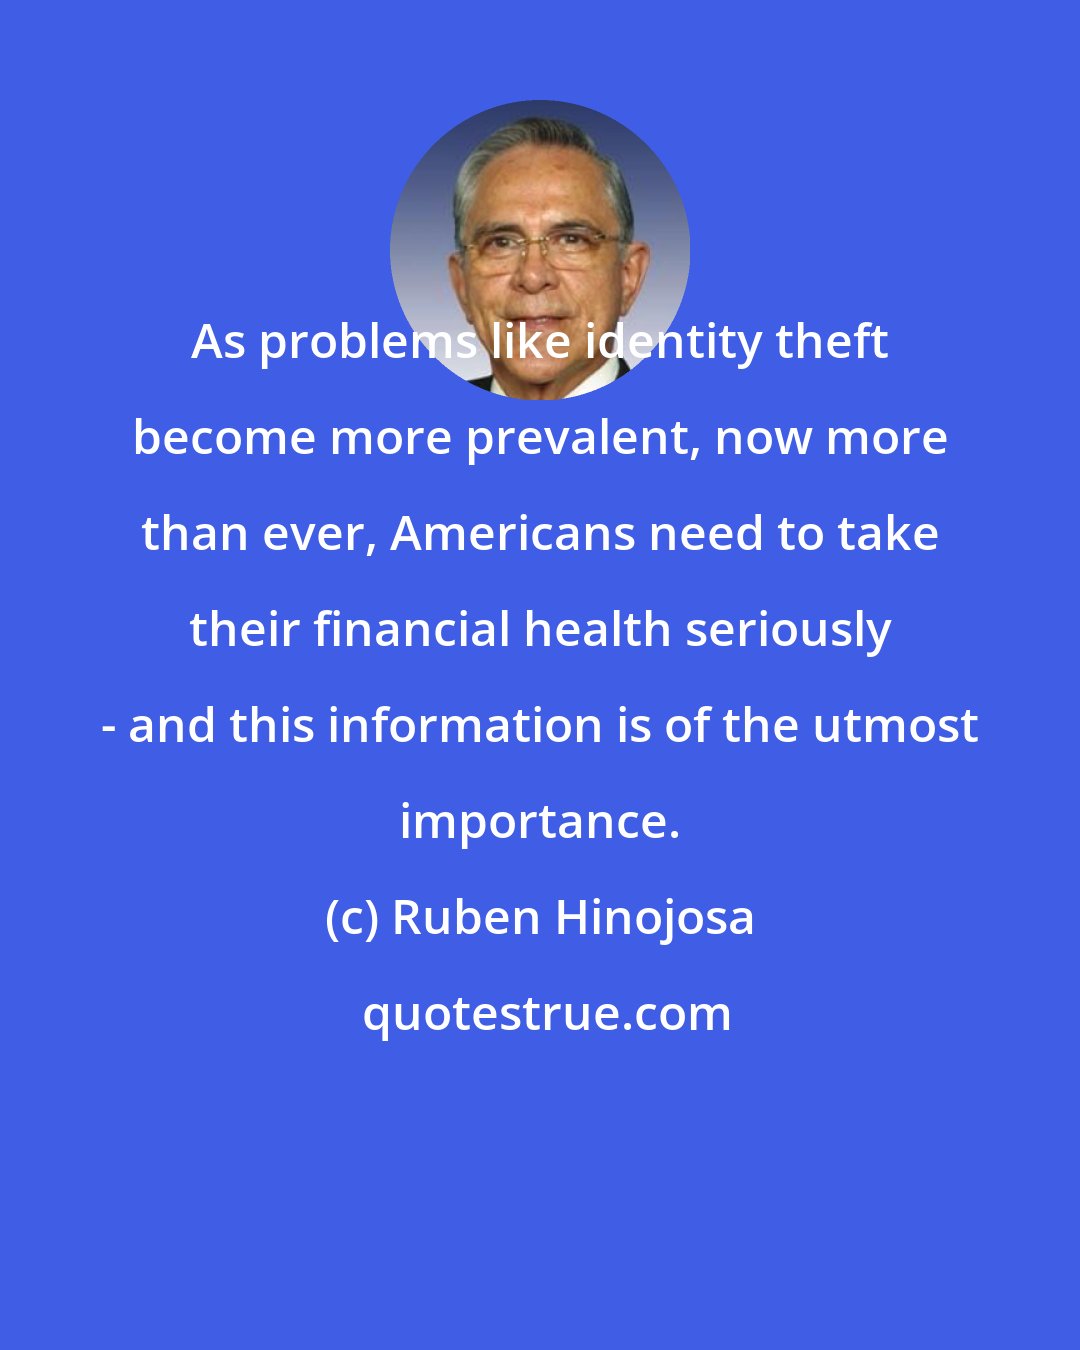 Ruben Hinojosa: As problems like identity theft become more prevalent, now more than ever, Americans need to take their financial health seriously - and this information is of the utmost importance.